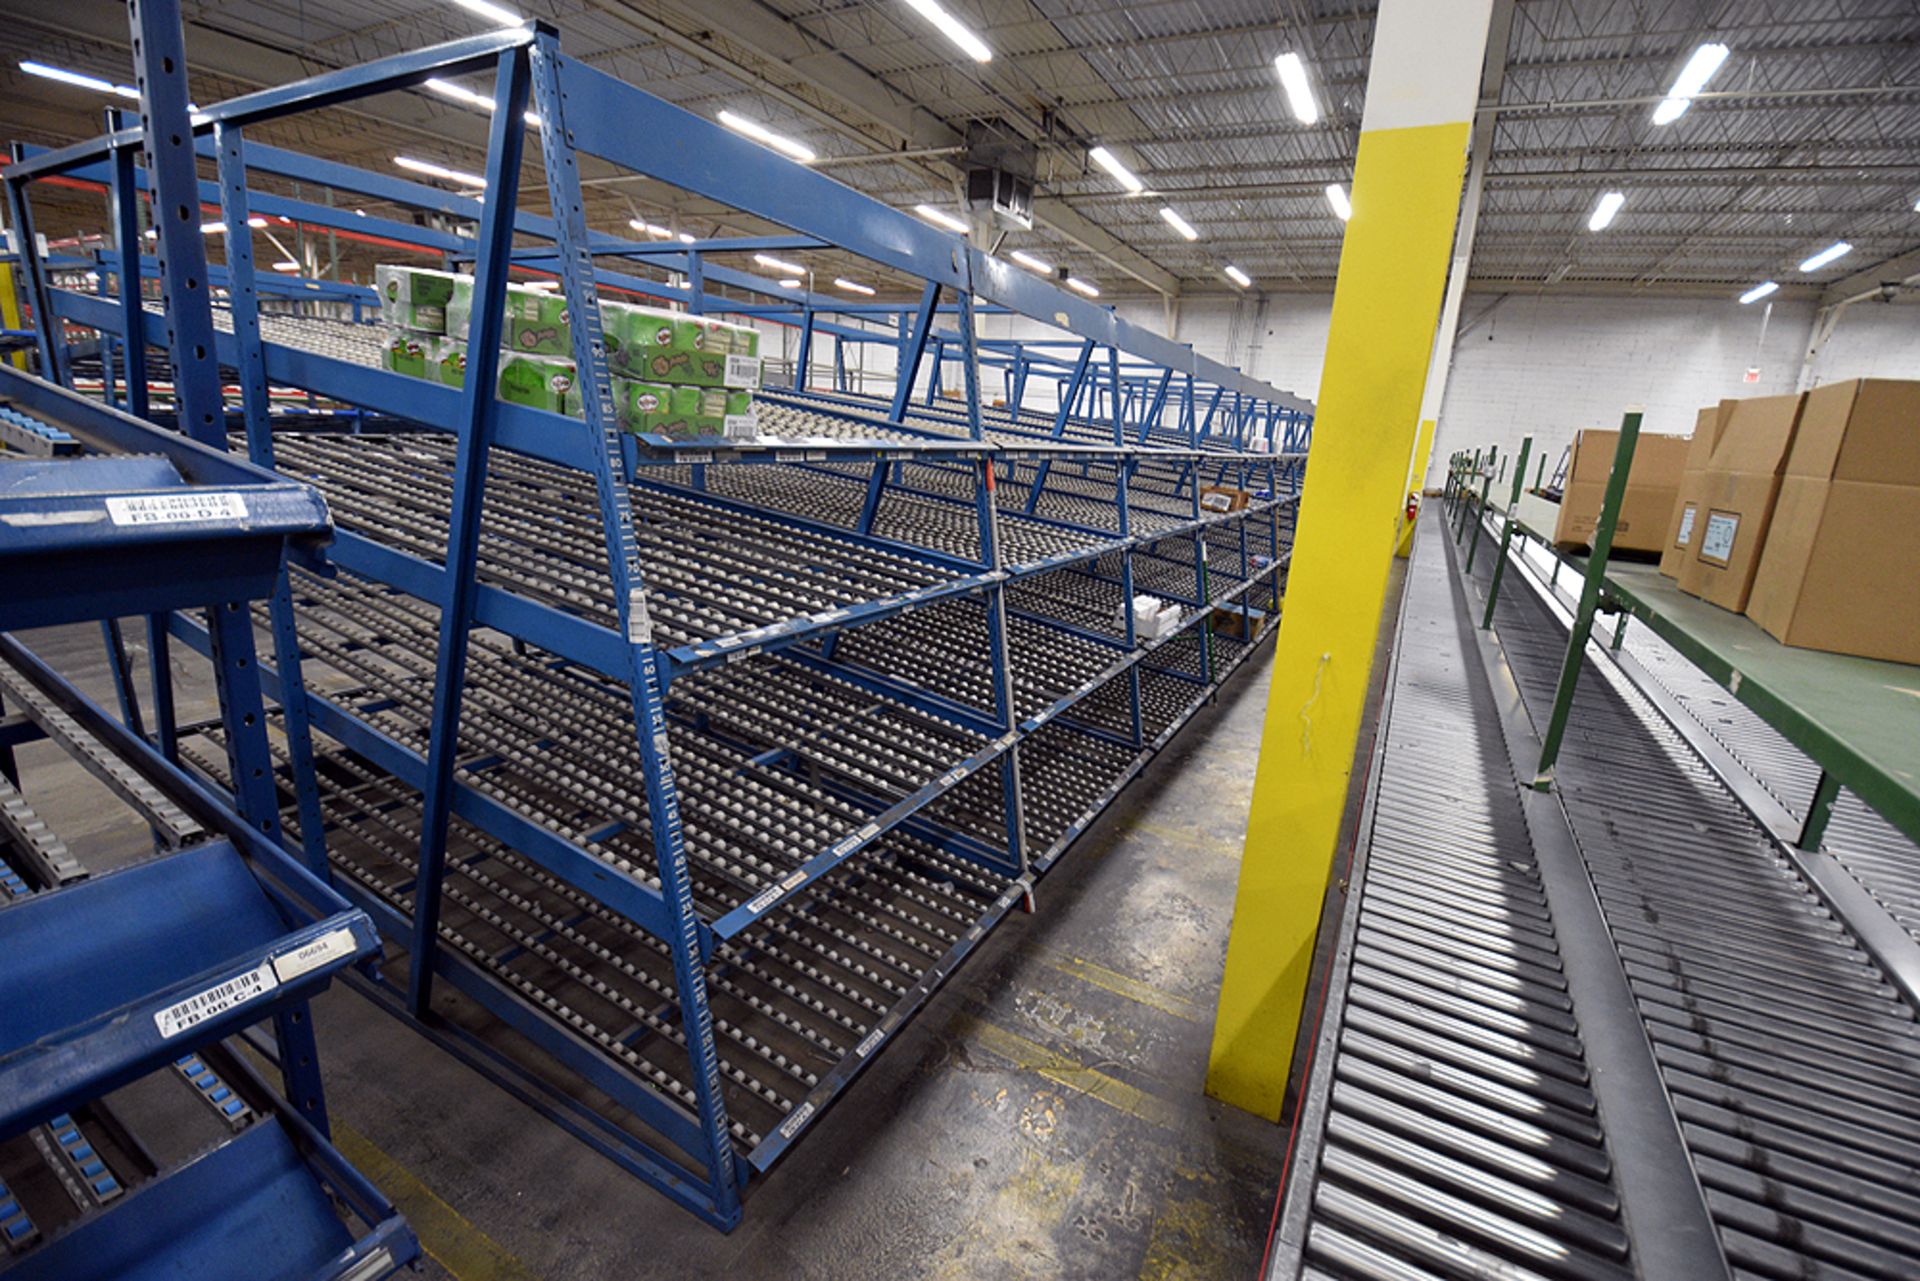 4-Tier Gravity Fed, Carton Flow Rack (116"x624"x95"H) (108"x1" Rollers) - Image 4 of 4